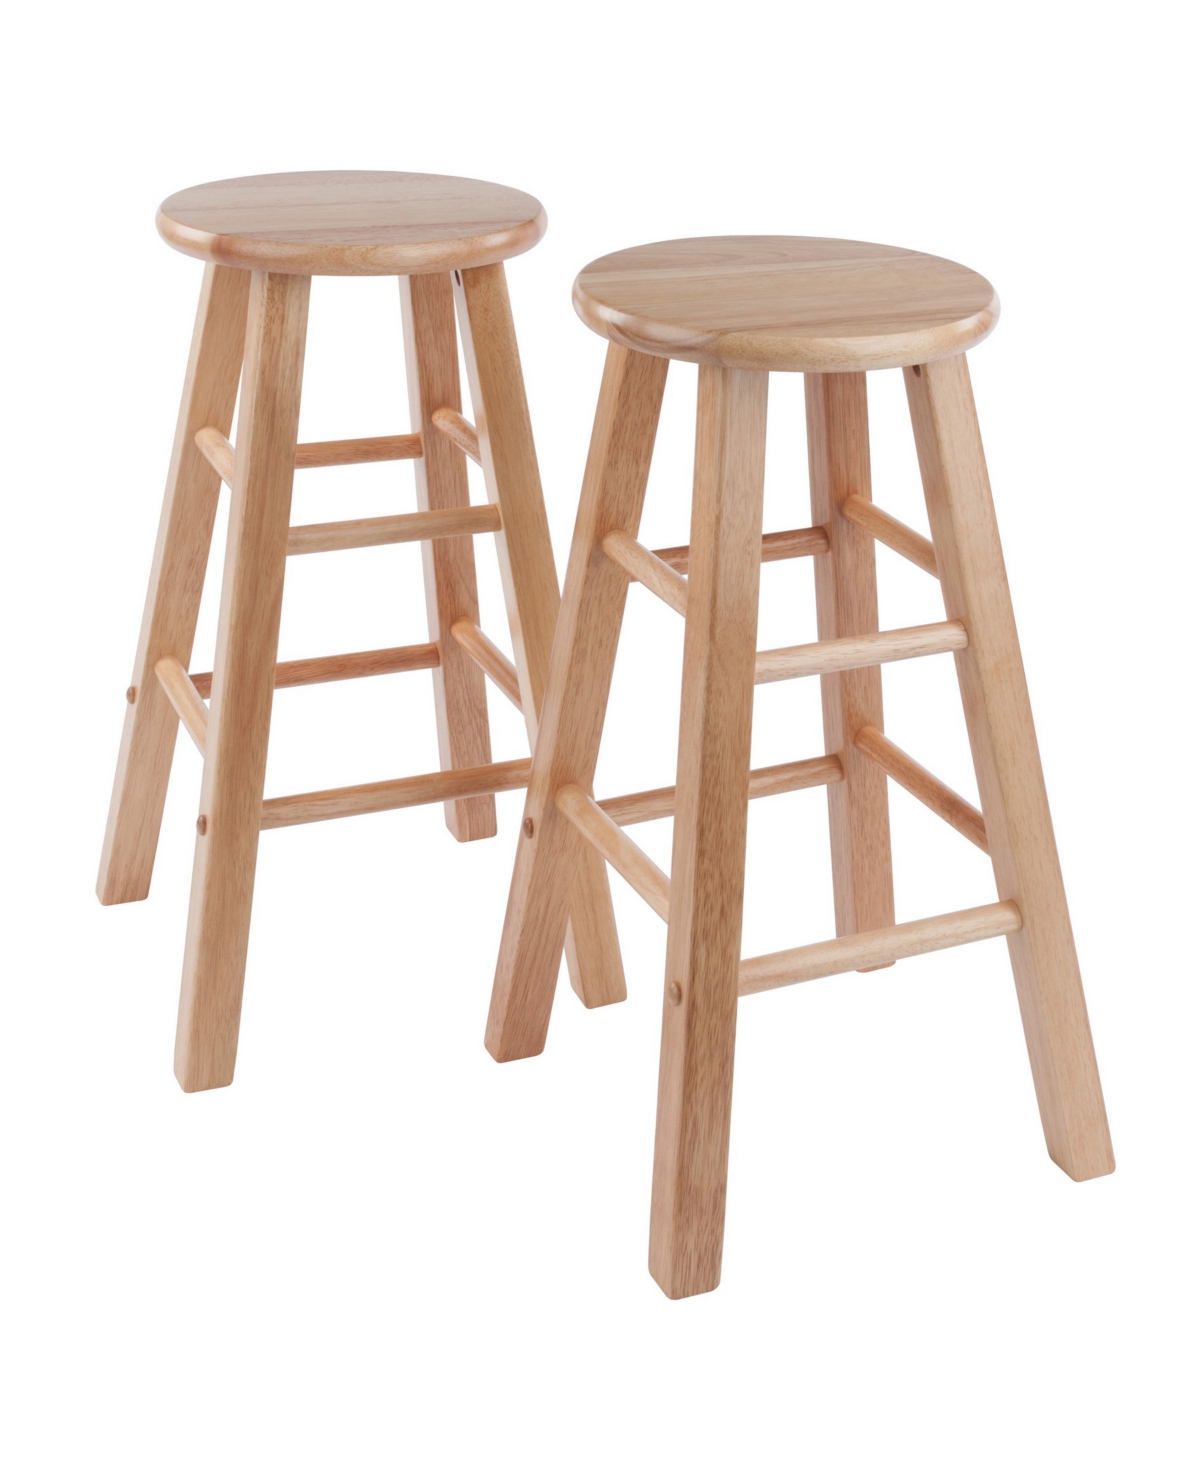 Winsome Element 2-piece Wood Counter Stool Set In Natural